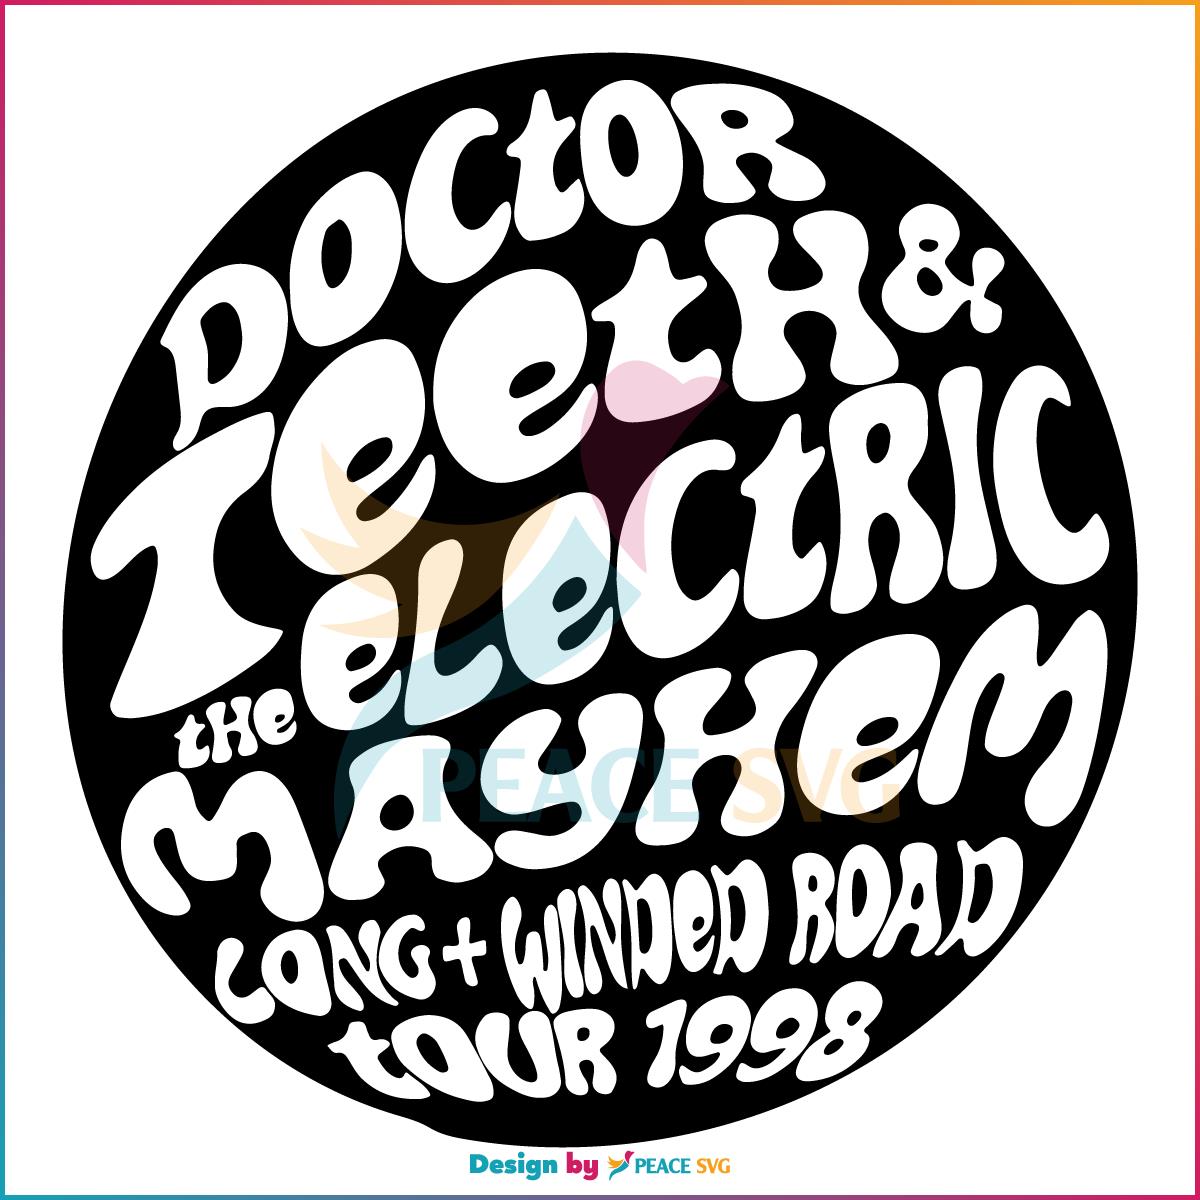 Dr Teeth And The Electric Mayhem The Long And Winded Road Tour 1998 SVG